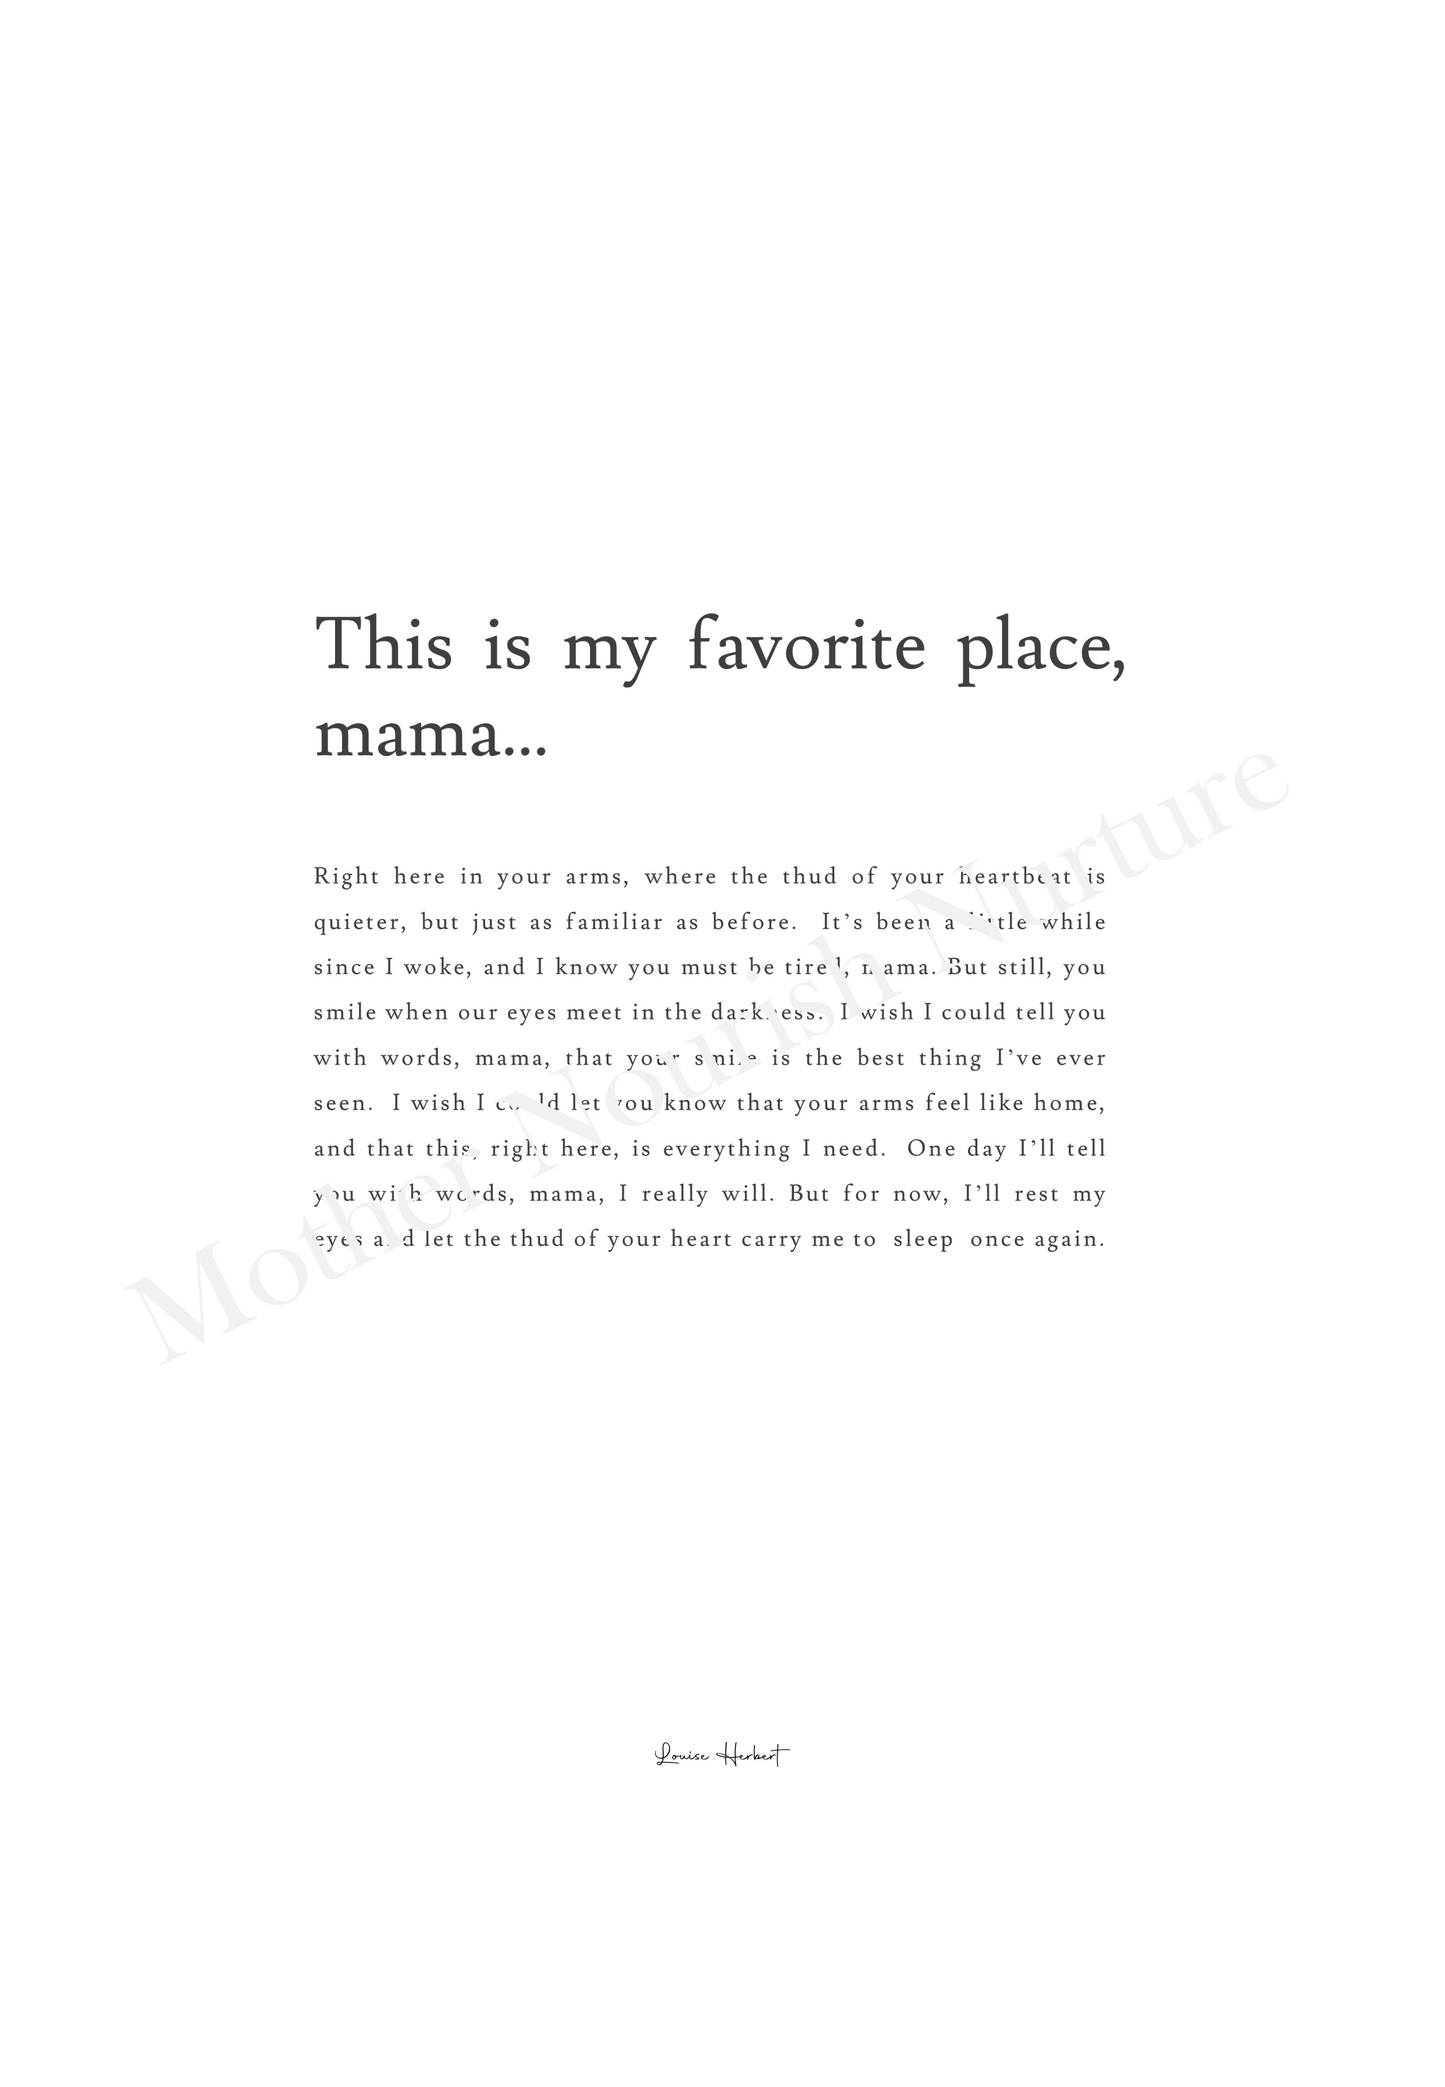 This Is My Favorite Place, Mama - Digital PDF